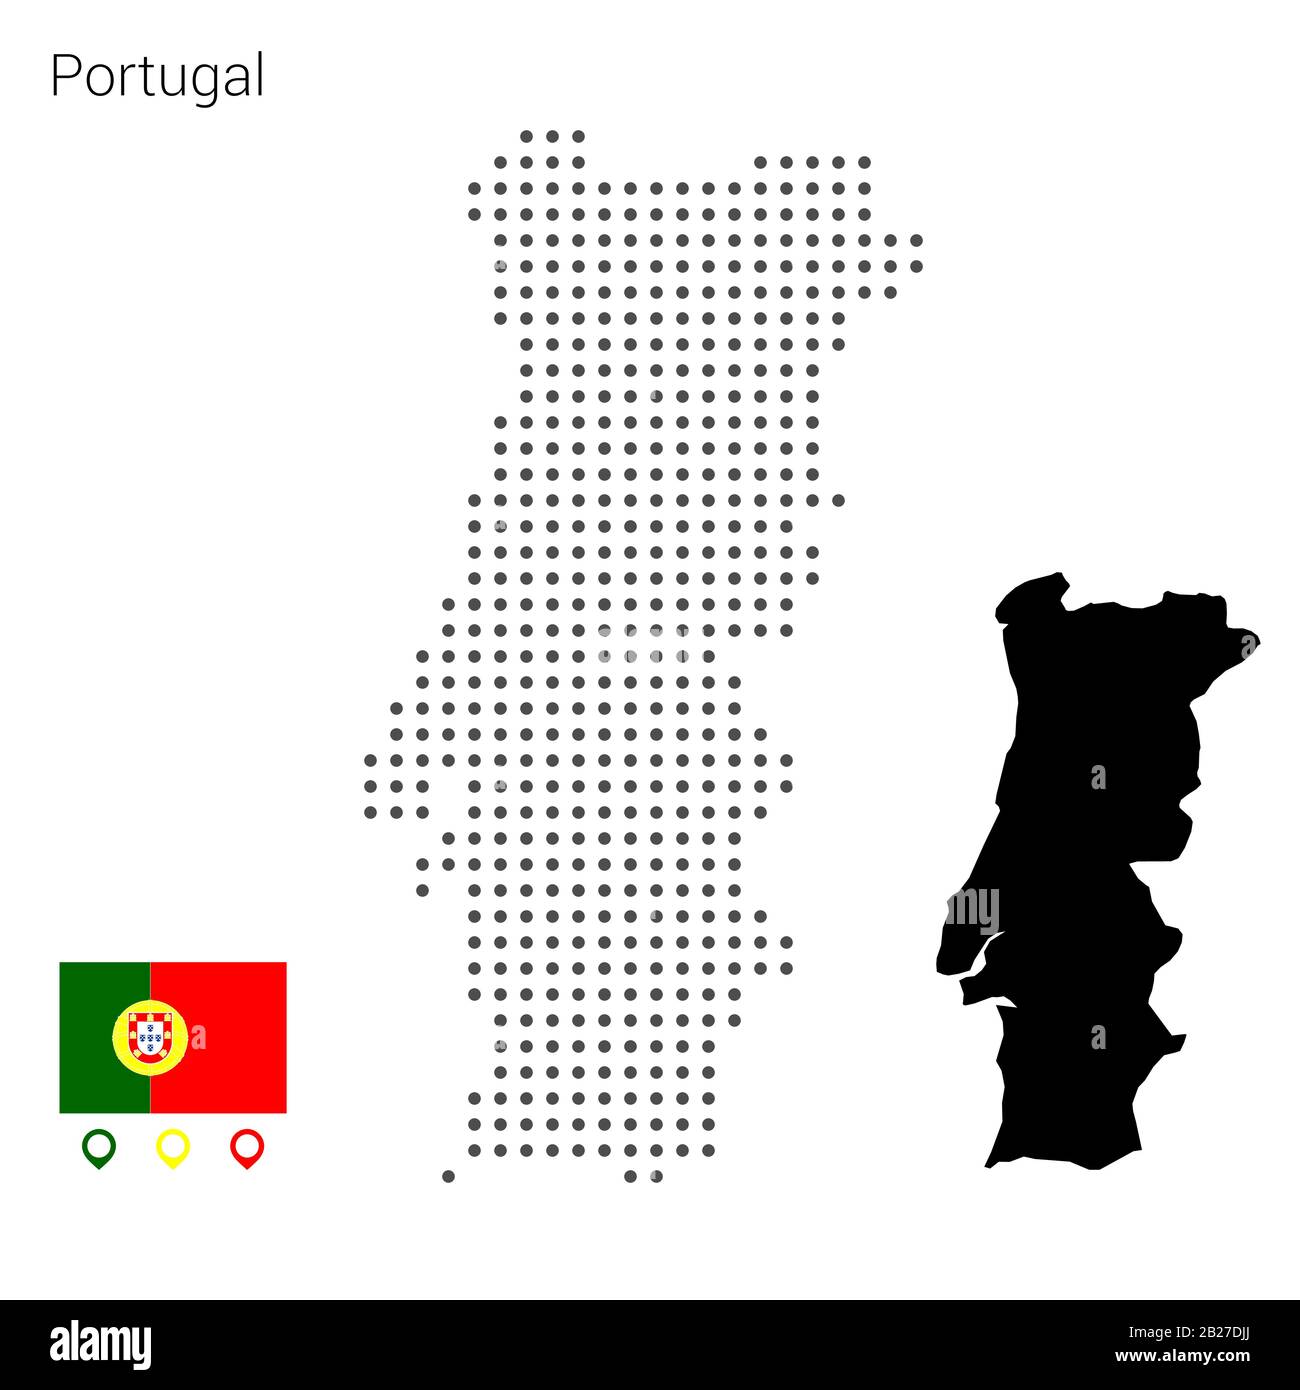 Vector Color Detailed Map Portugal Administrative Stock Vector (Royalty  Free) 2107782521